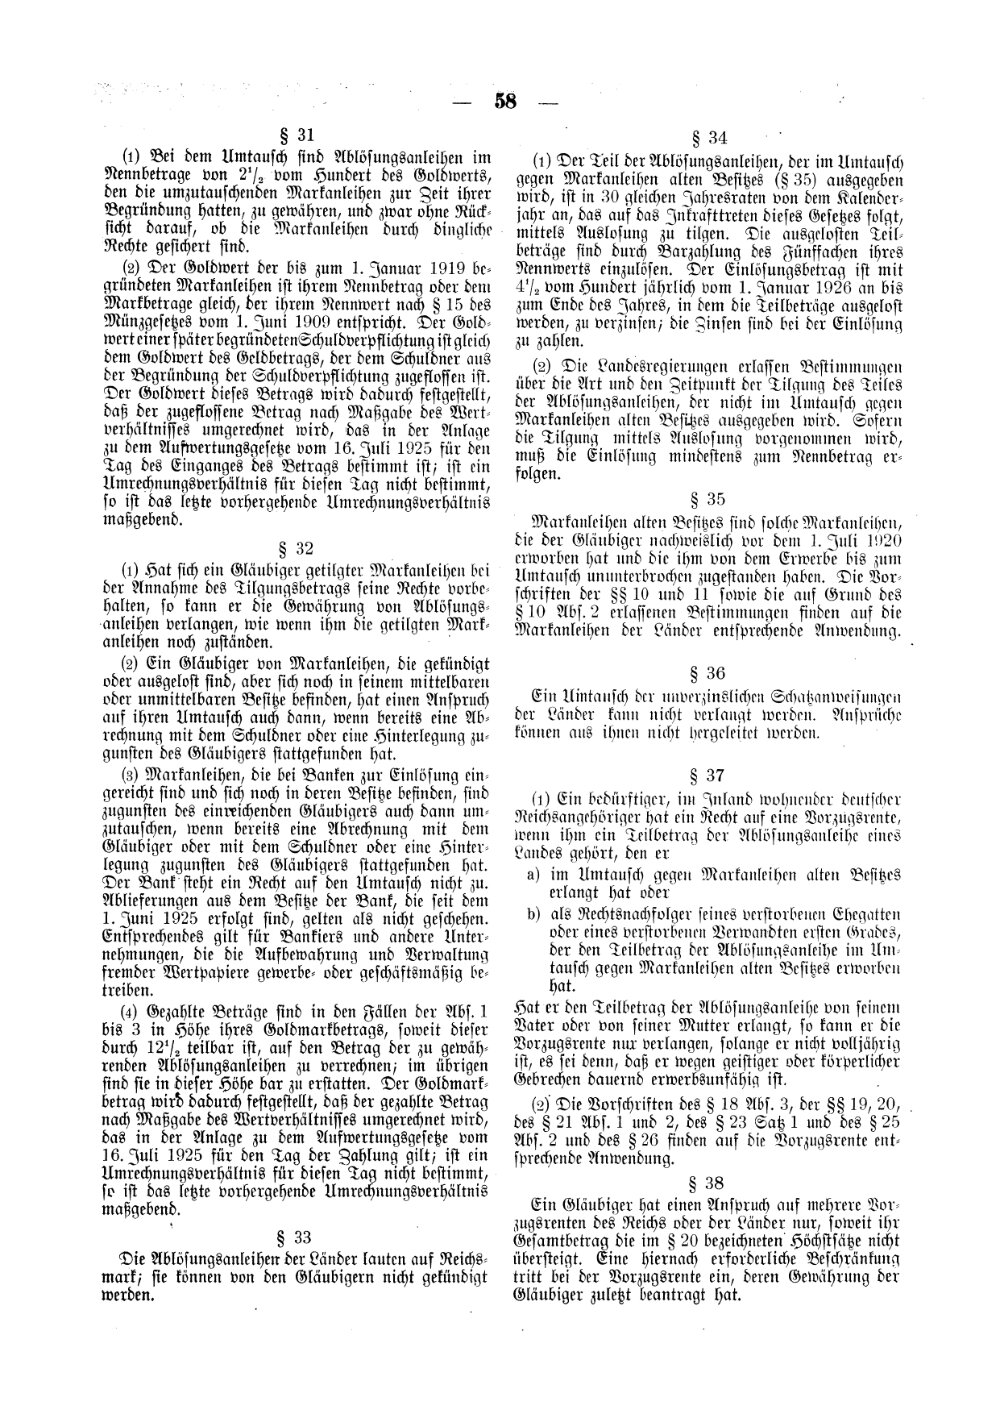 Scan of page 58